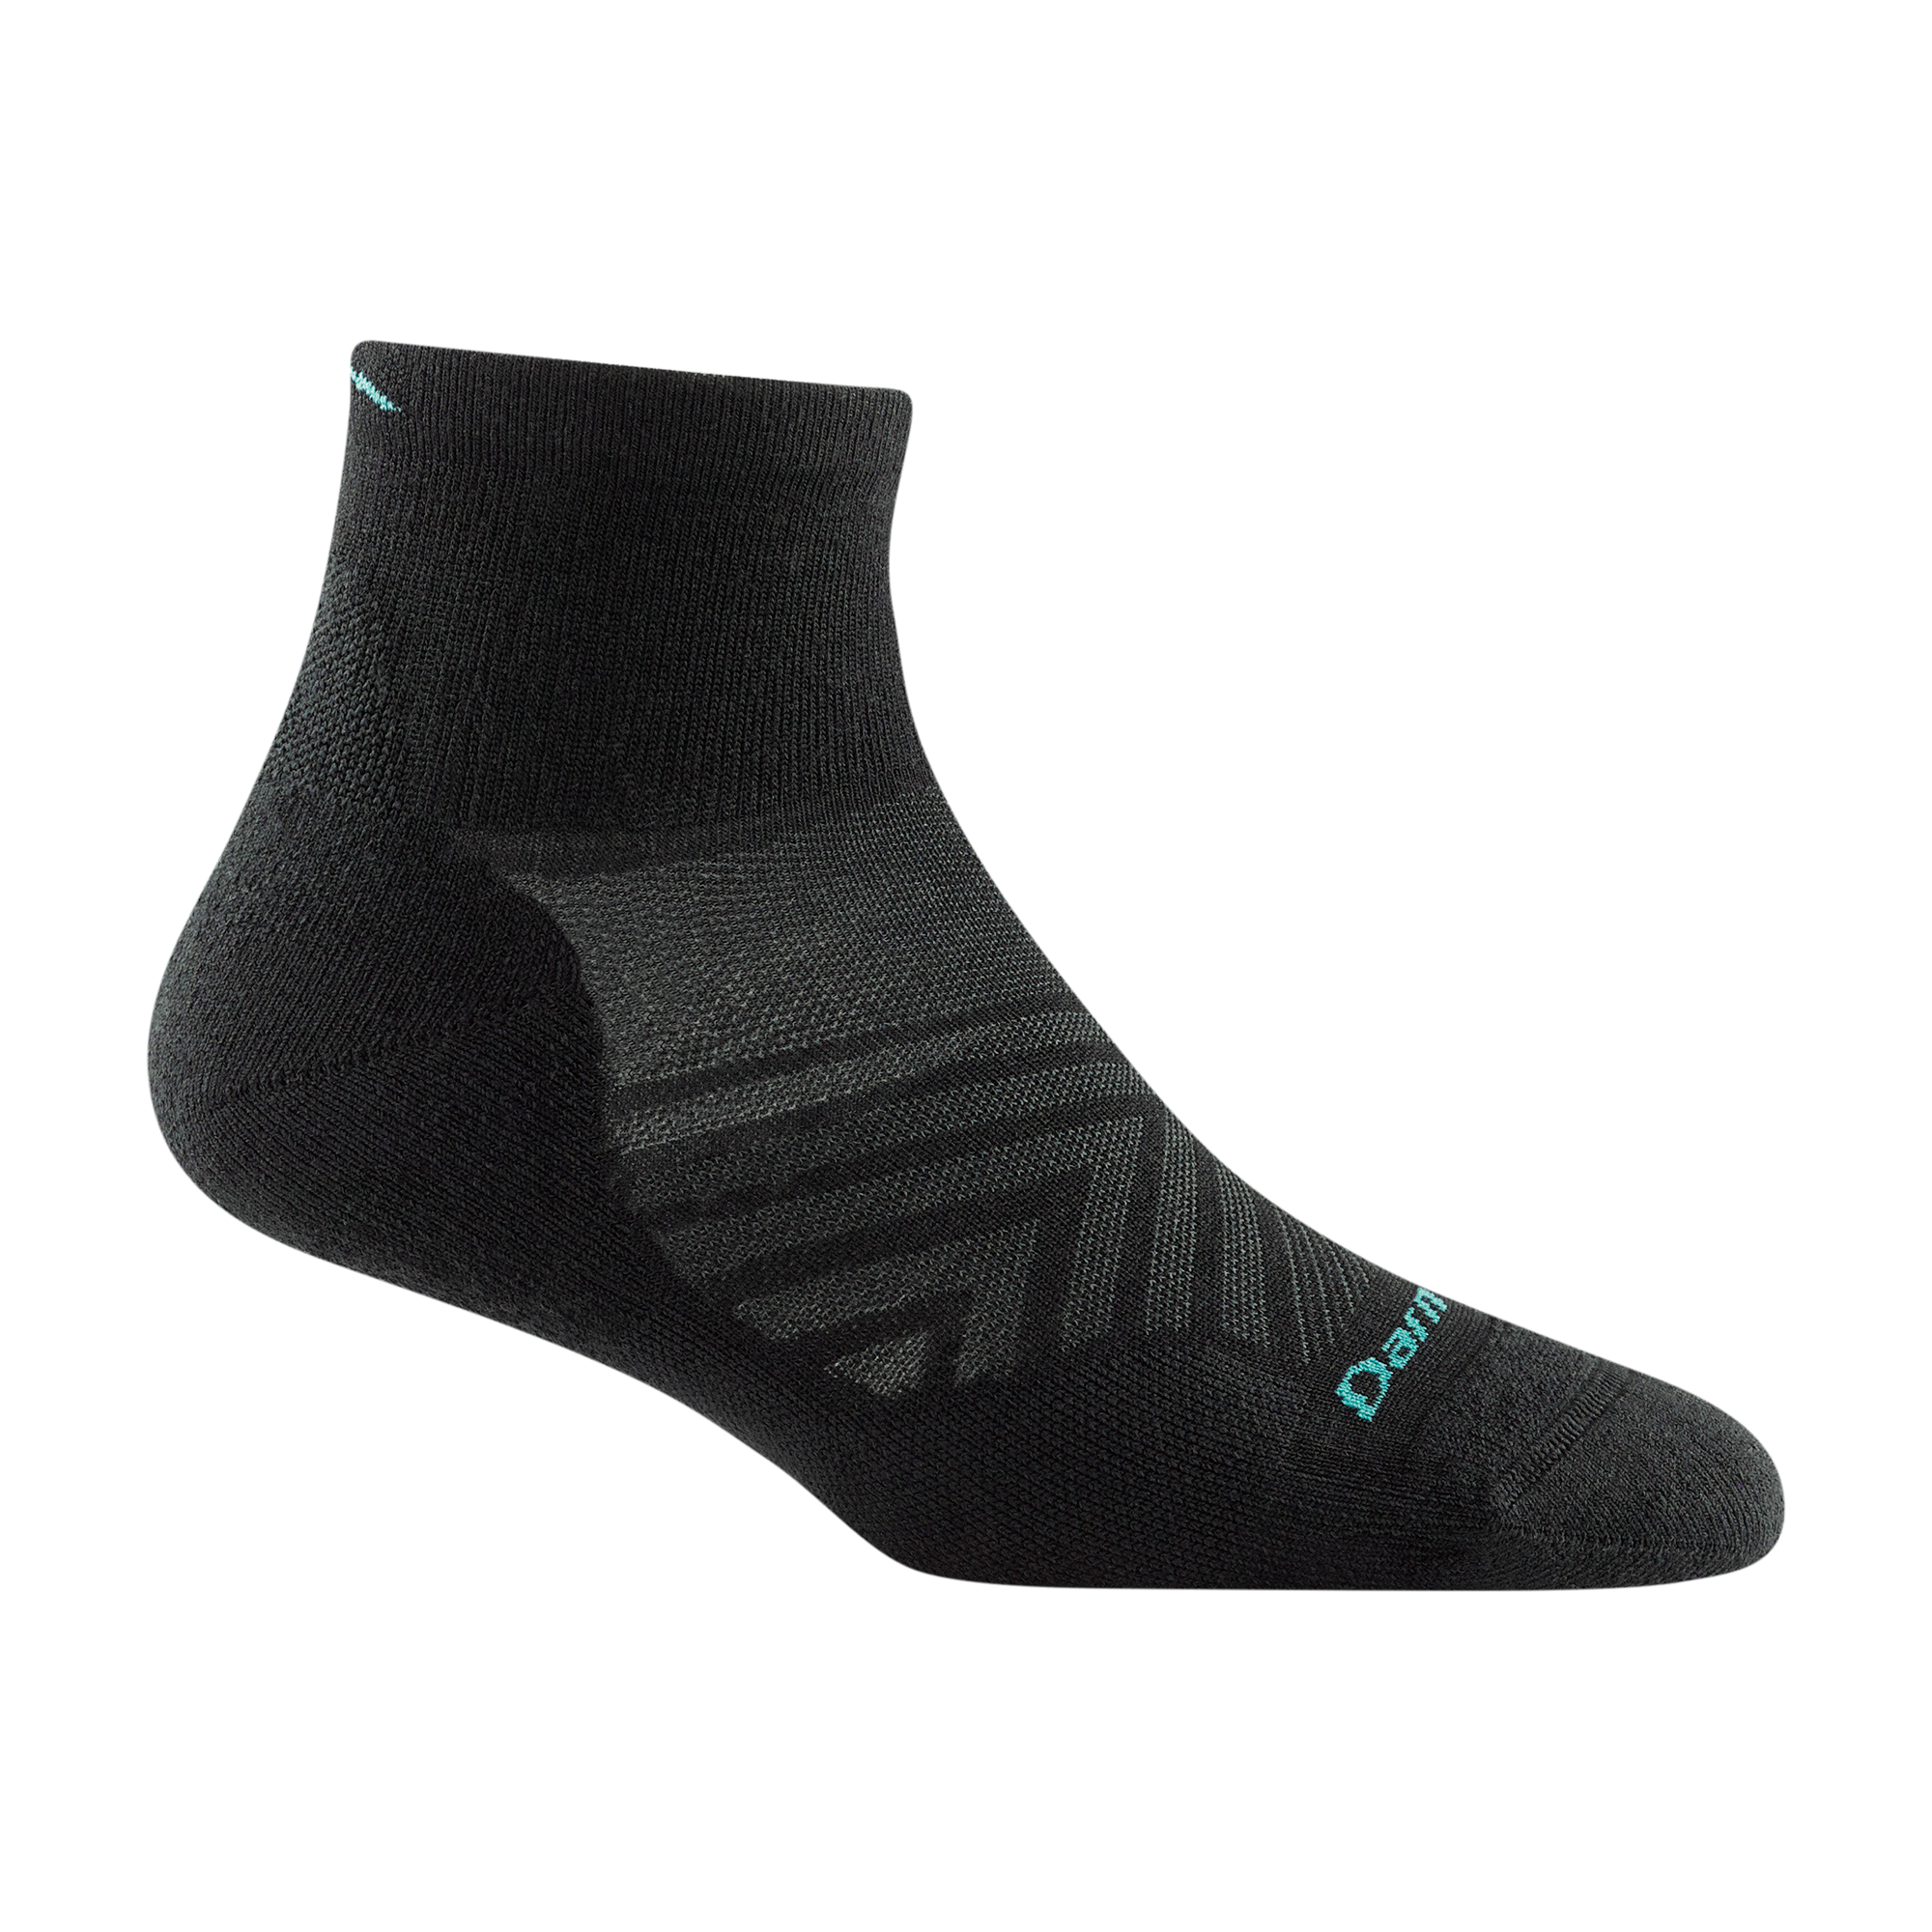 1048 women's quarter running sock in black with grey chevron forefoot detailing and light blue darn tough signature